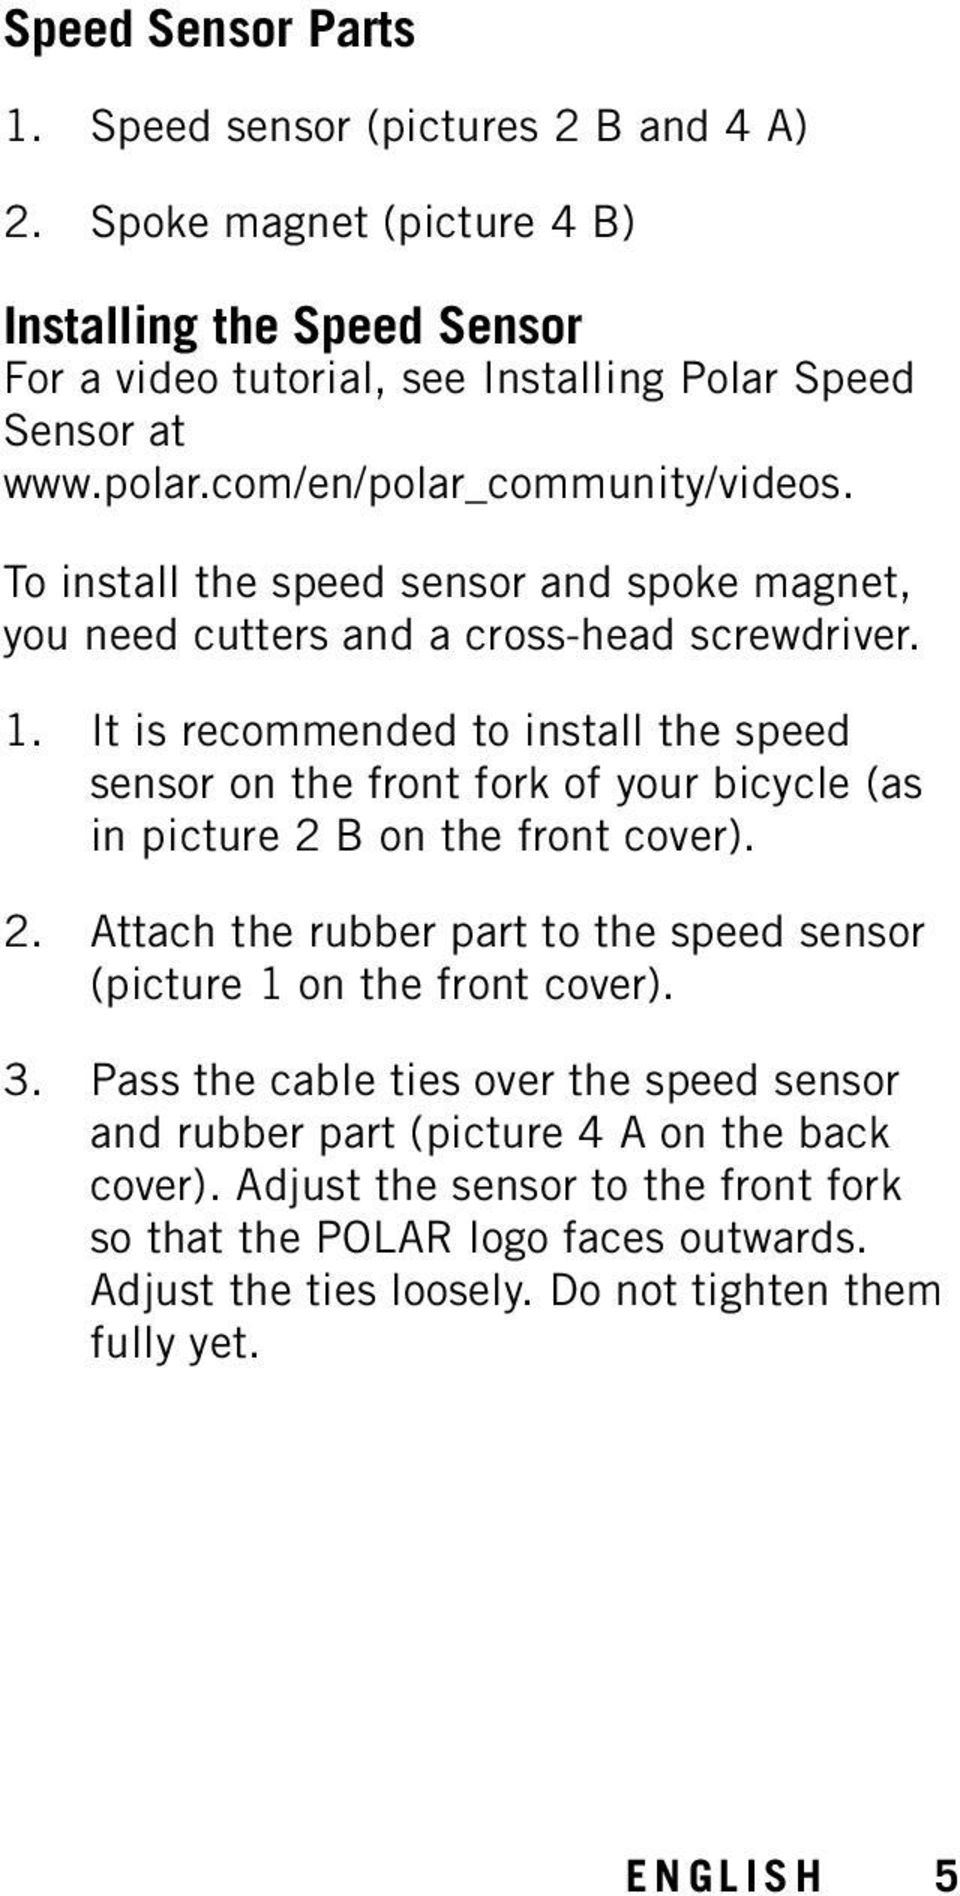 It is recommended to install the speed sensor on the front fork of your bicycle (as in picture 2 B on the front cover). 2. Attach the rubber part to the speed sensor (picture 1 on the front cover).